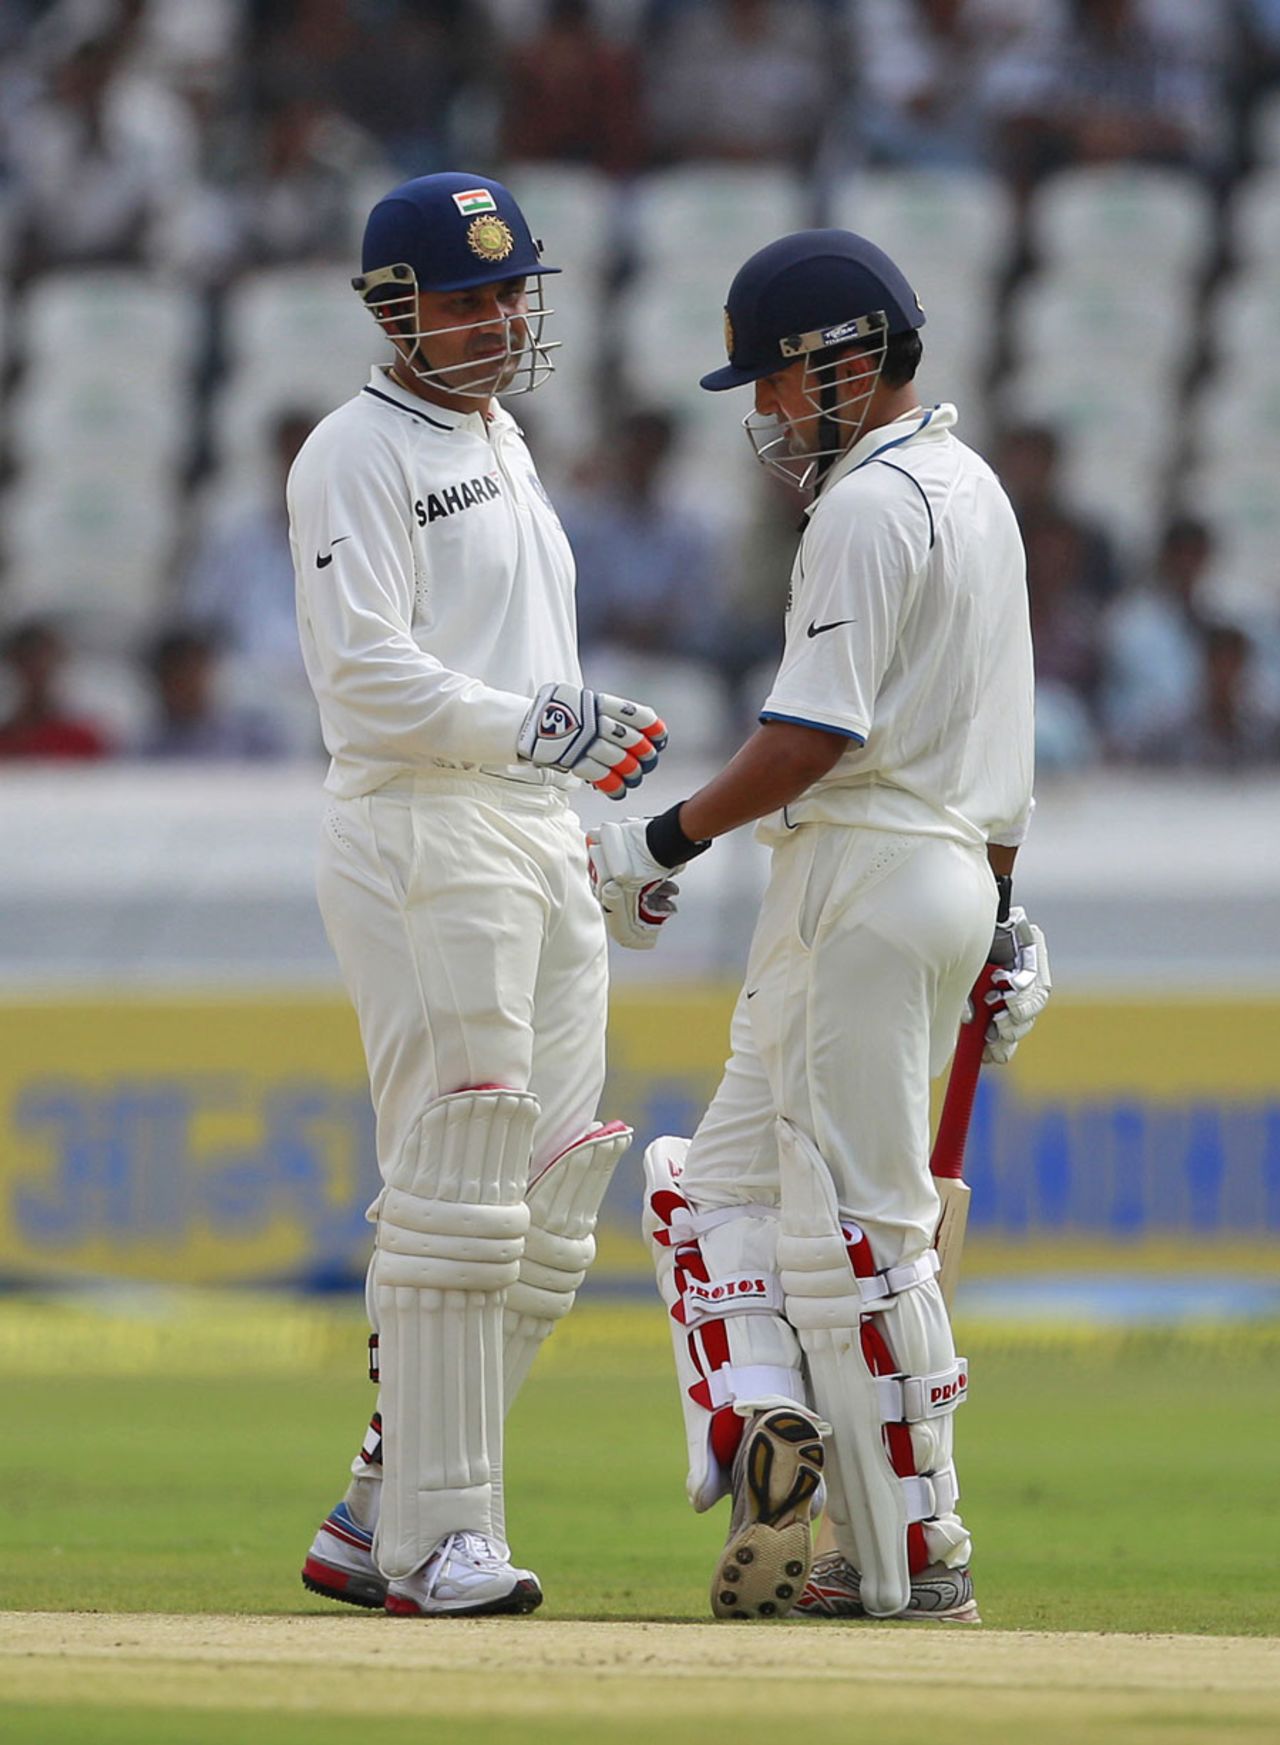 Virender Sehwag and Gautam Gambhir have a chat, India v New Zealand, 1st Test, Hyderabad, 1st day, August 23, 2012